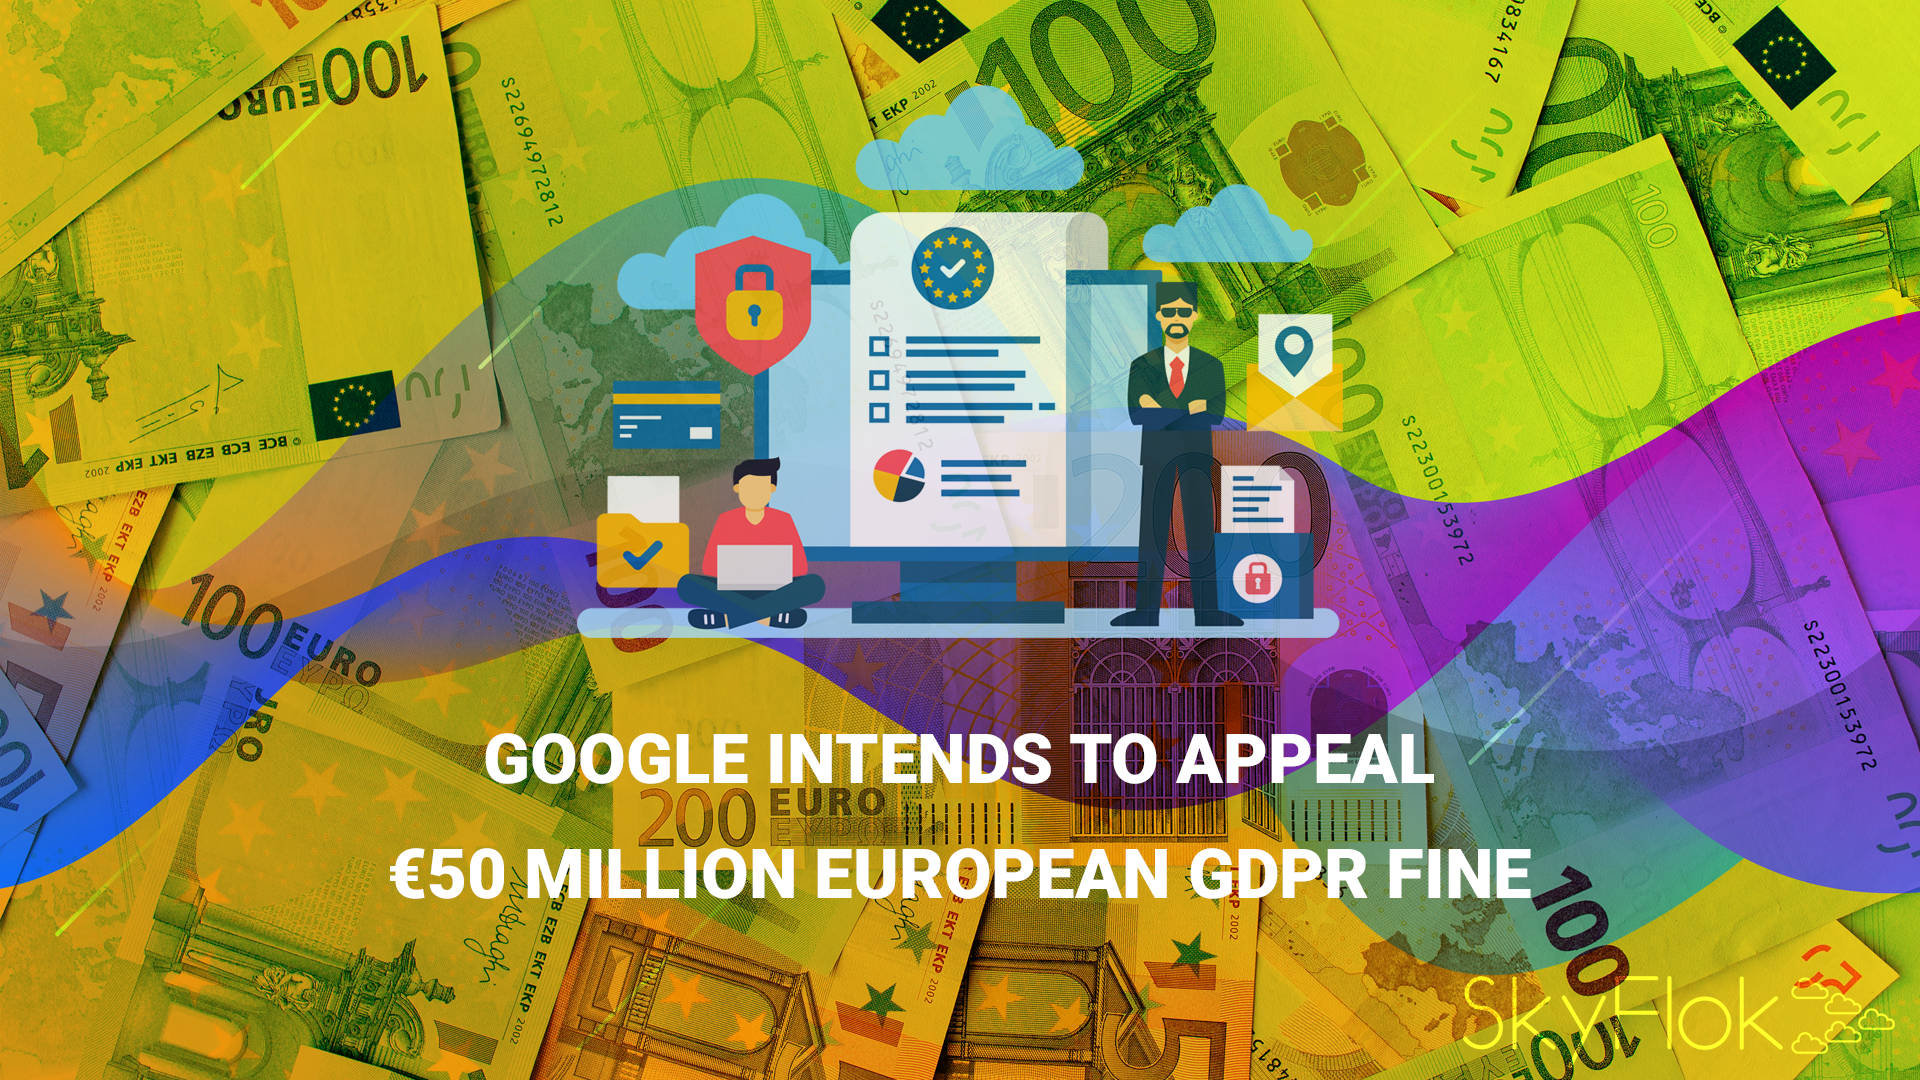 You are currently viewing Google intends to appeal €50 million European GDPR fine